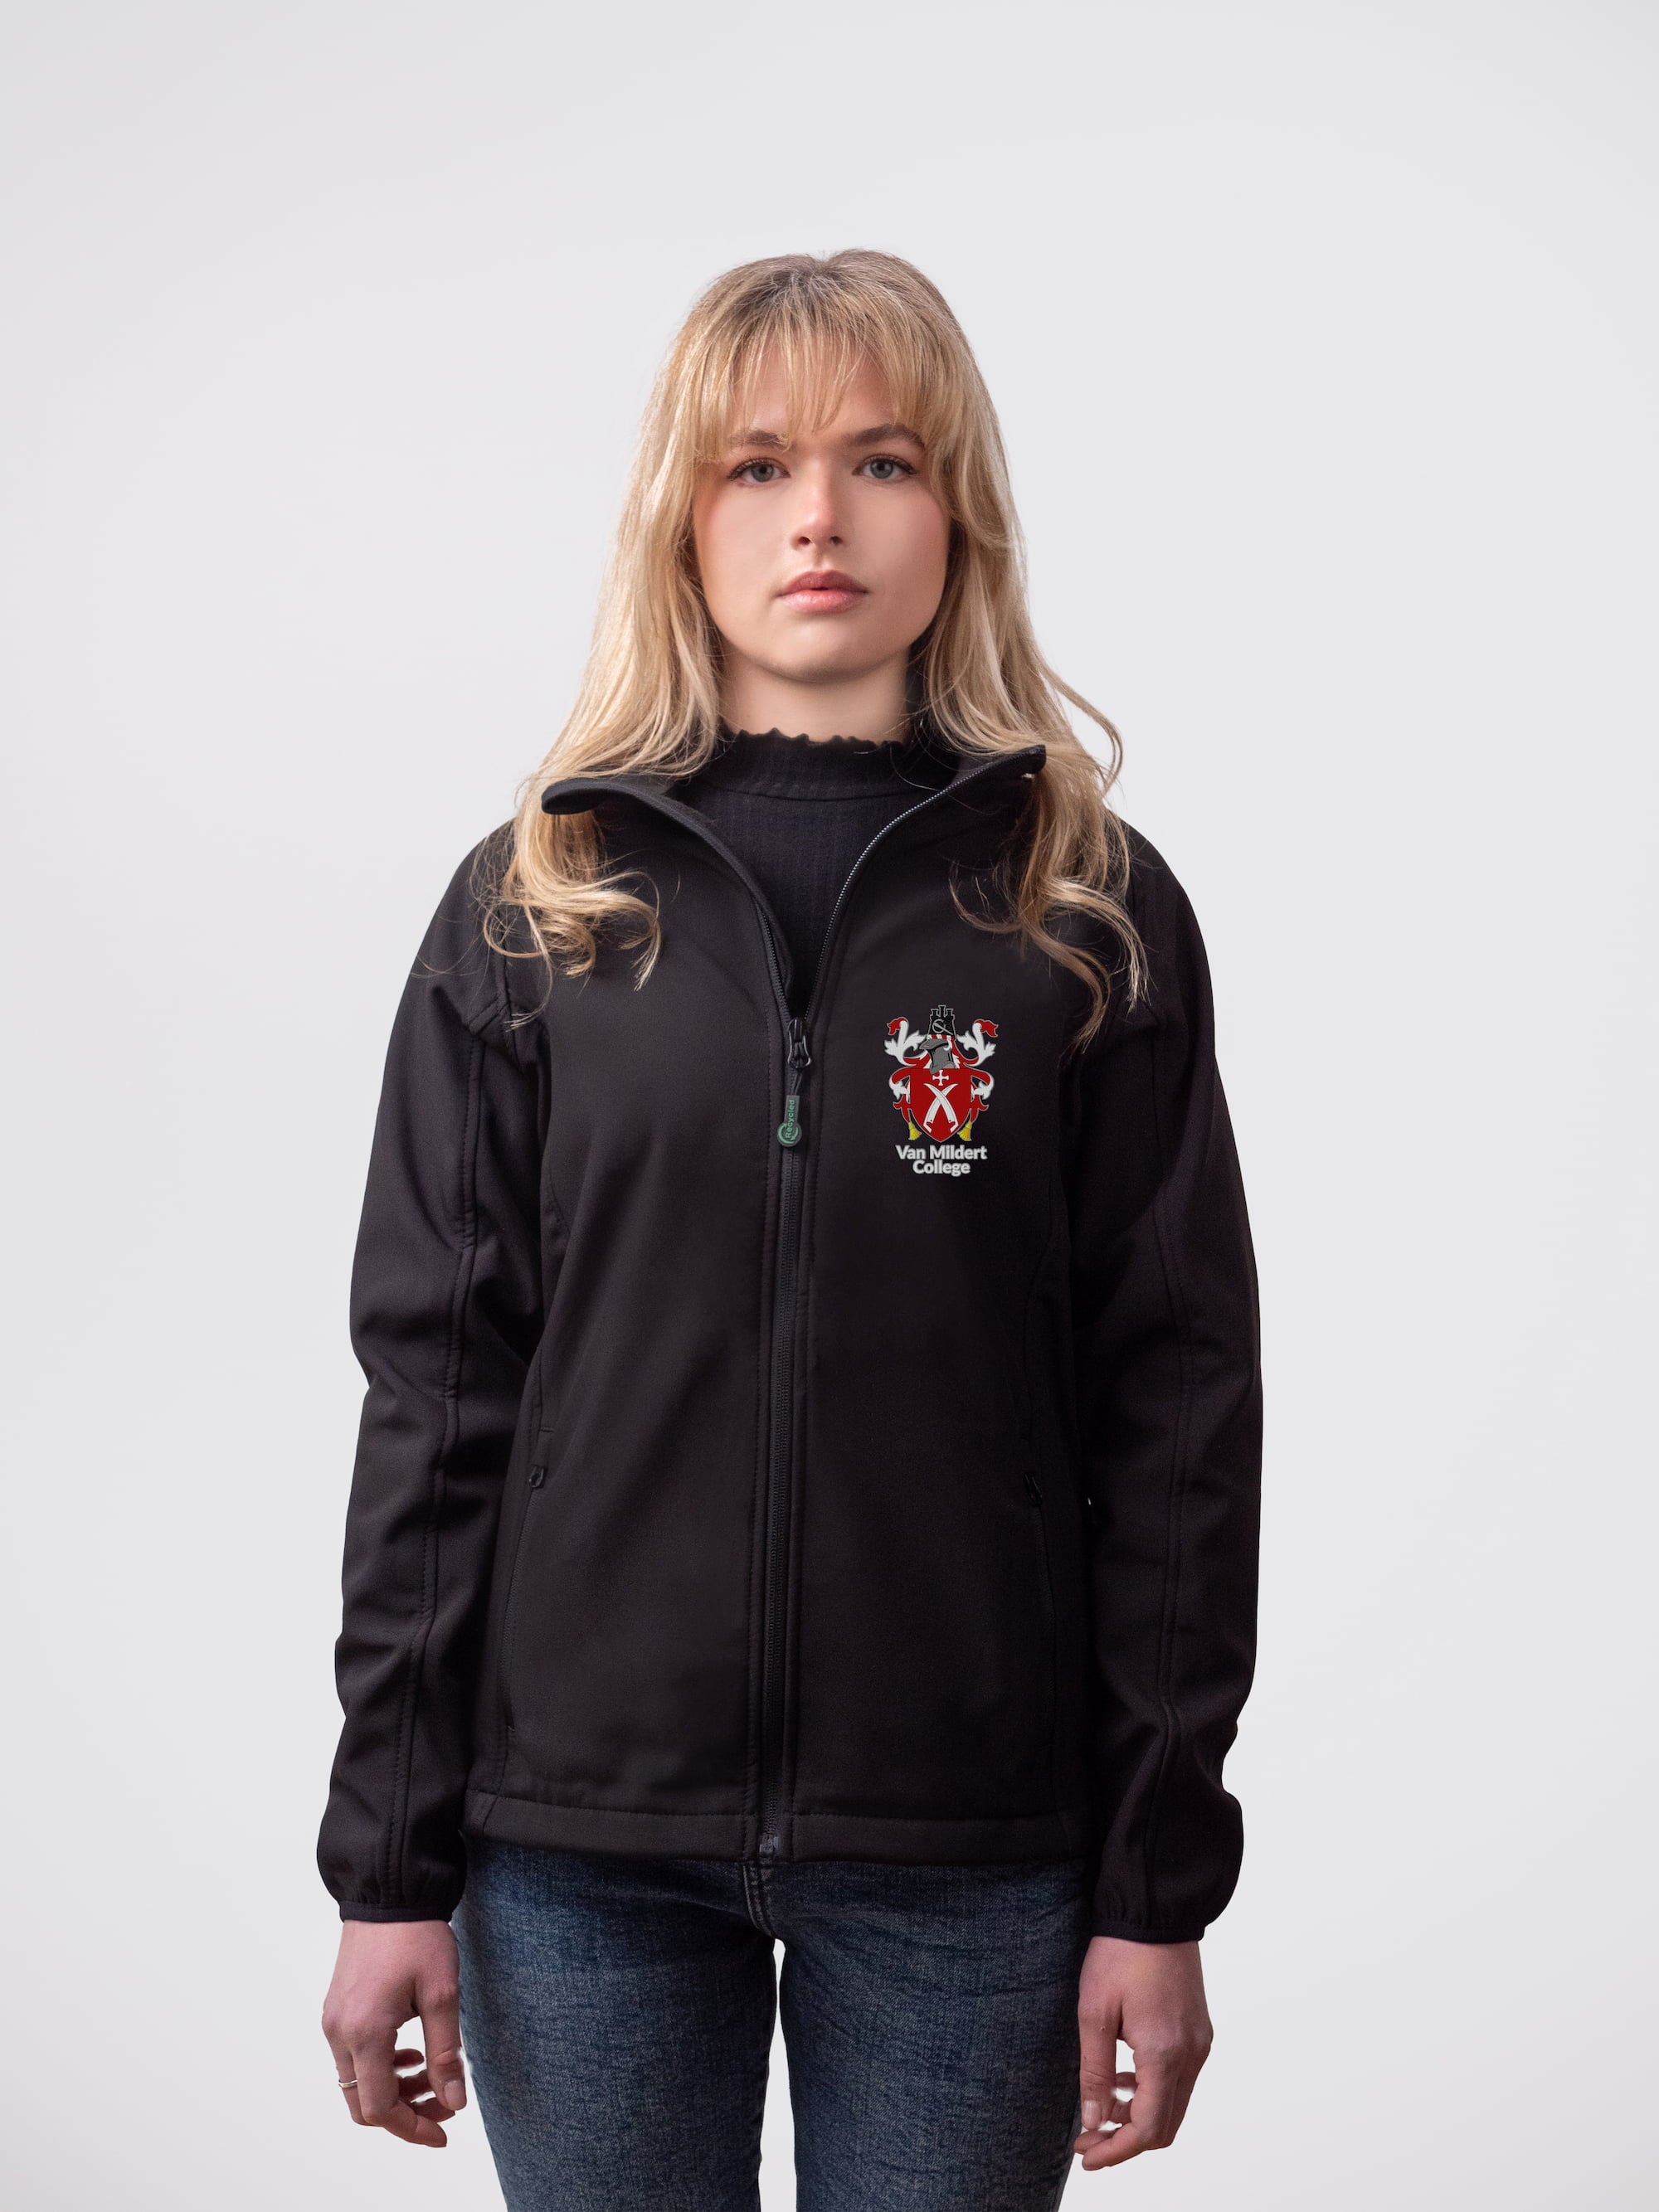 A student wearing a sustainable, Van Mildert College embroidered jacket